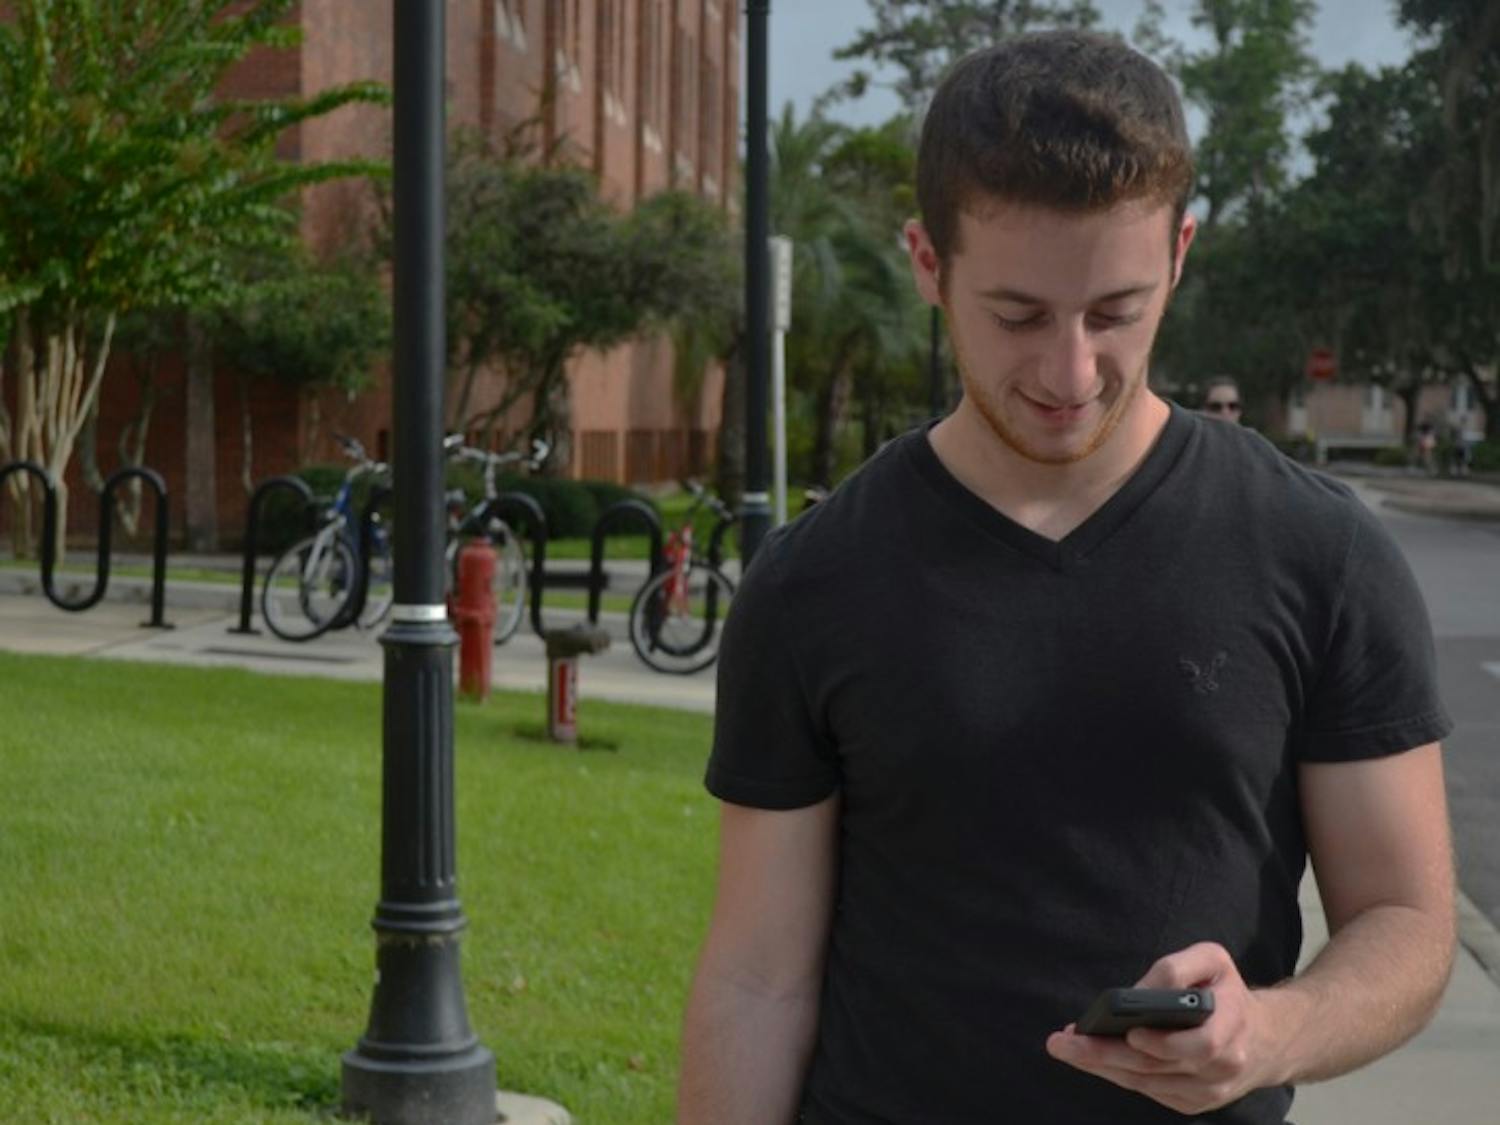 UF computer science and engineering senior Bryan Dubno, 22, the creator of UFmobile, uses the free iPhone app on campus. The app includes an interactive campus map to help students find their classes.